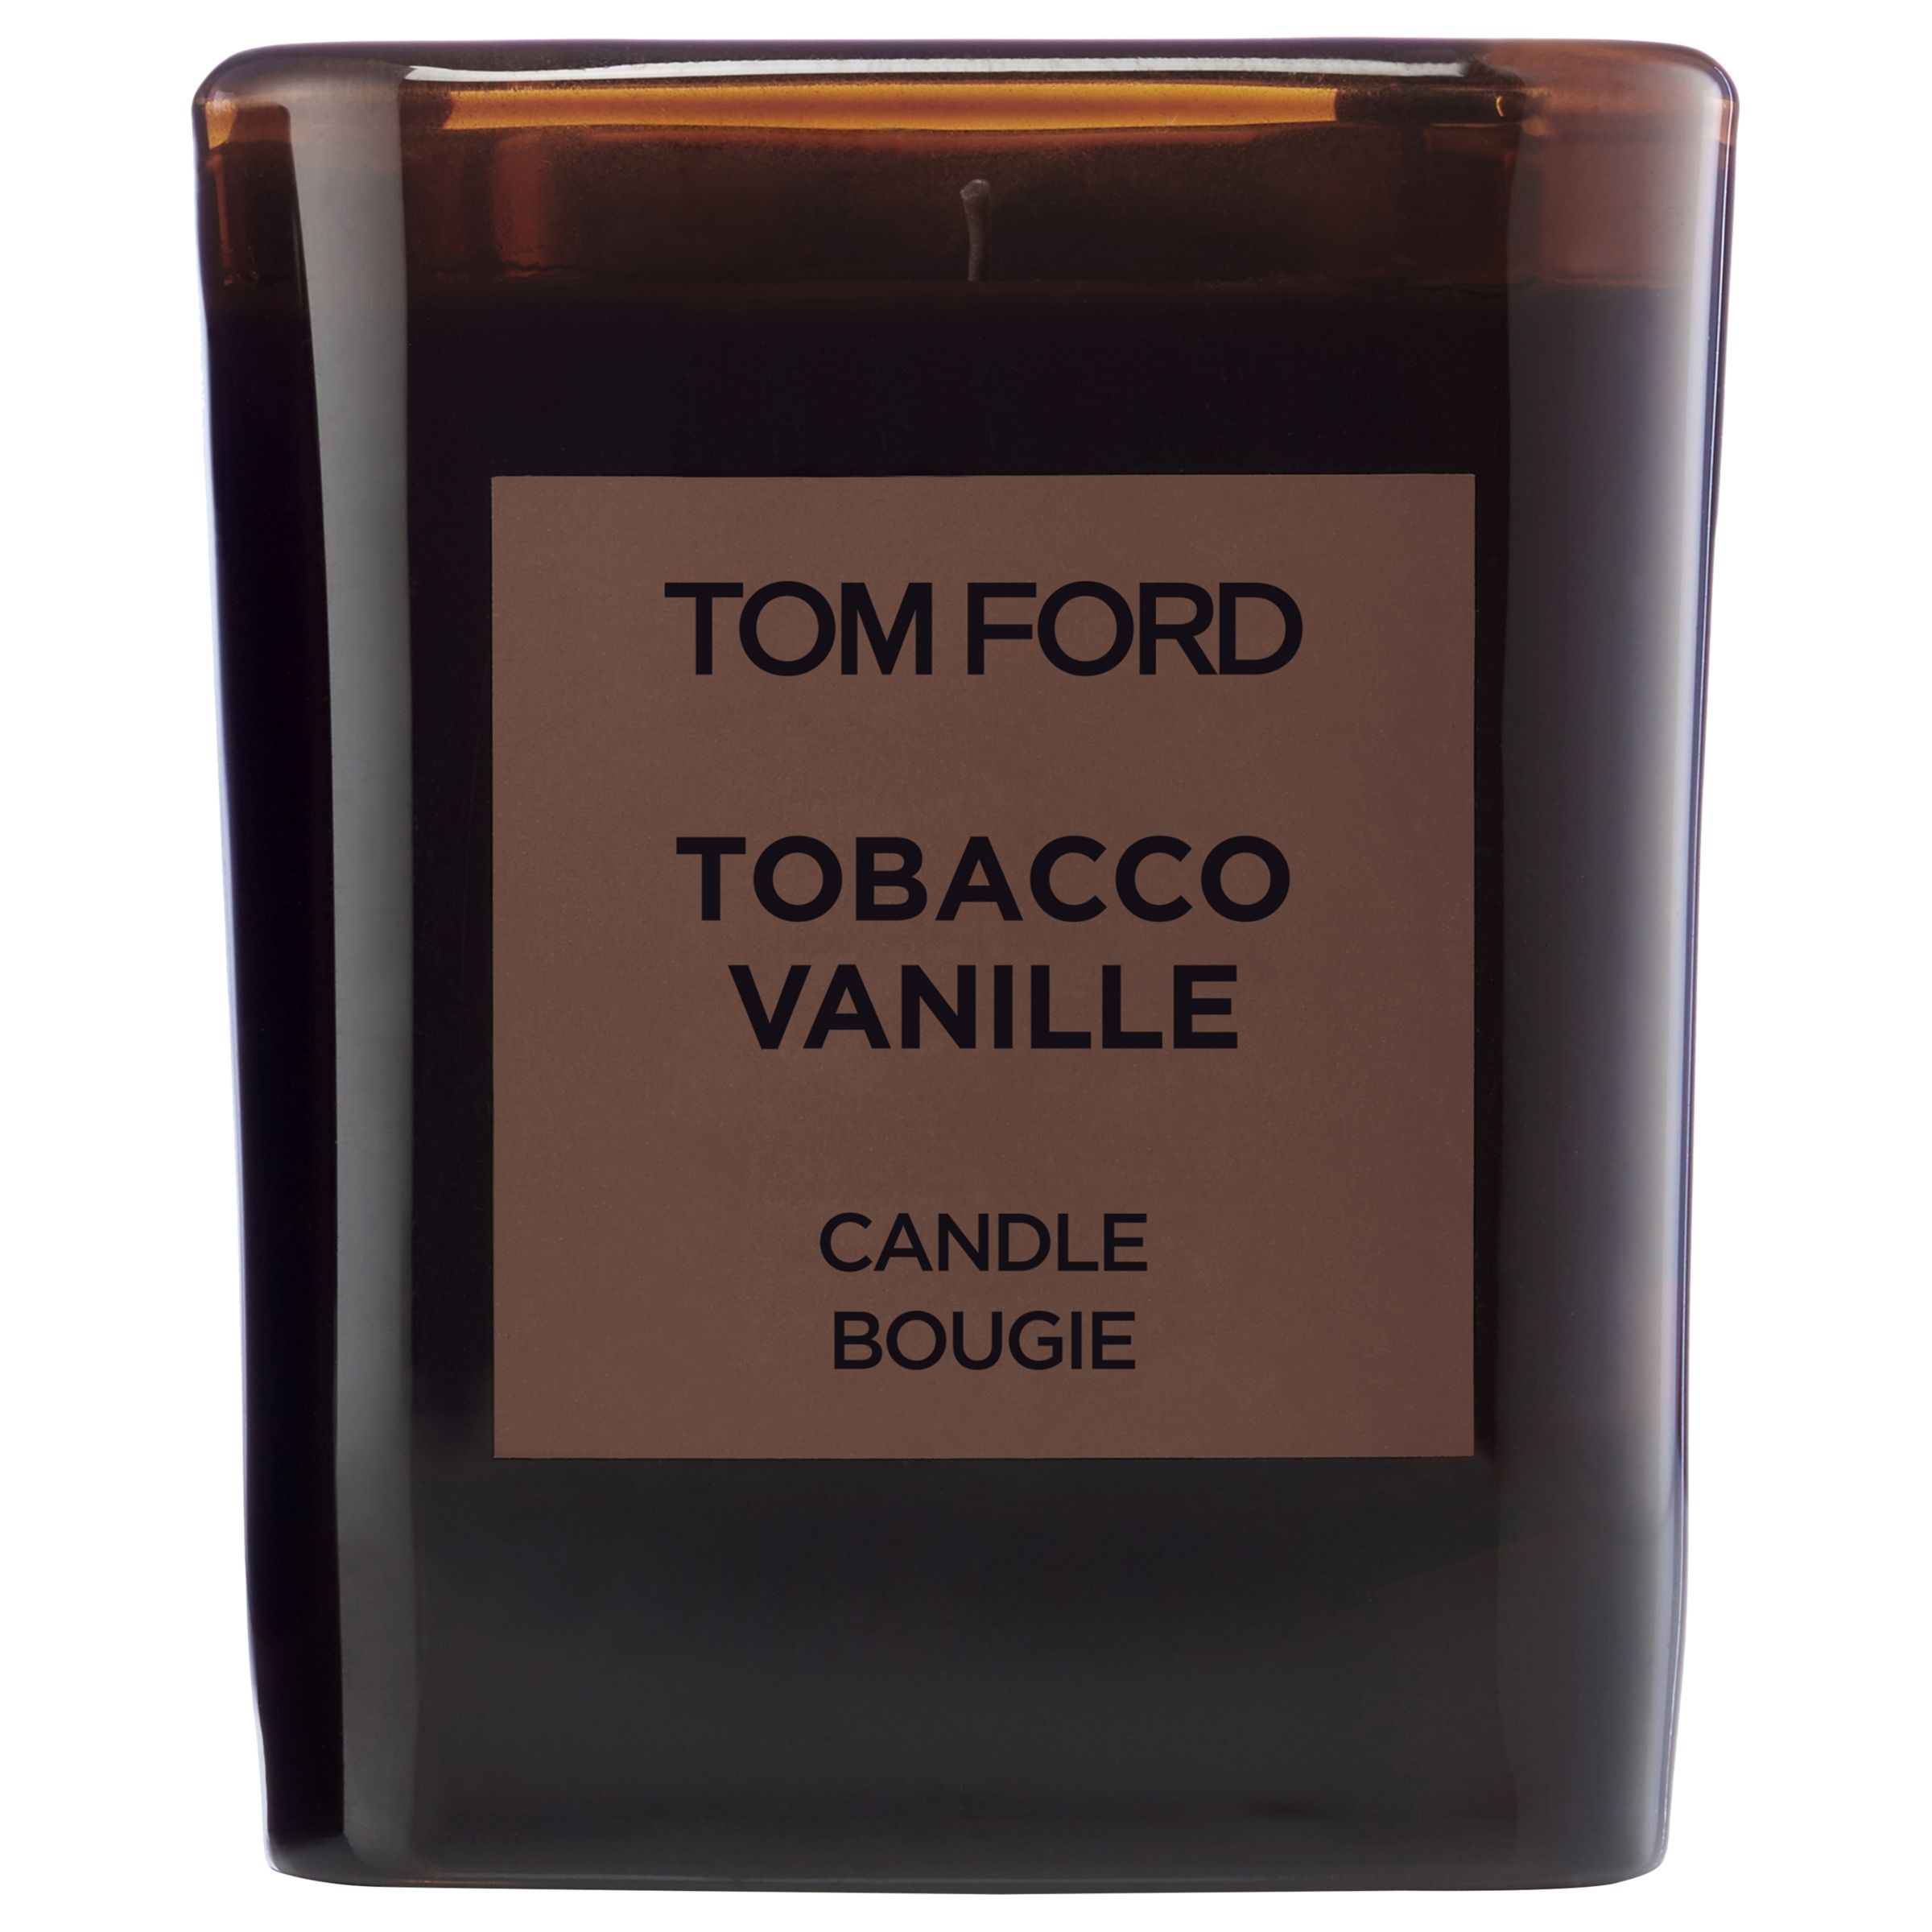 TOM FORD Private Blend Tobacco Vanille Scented Candle